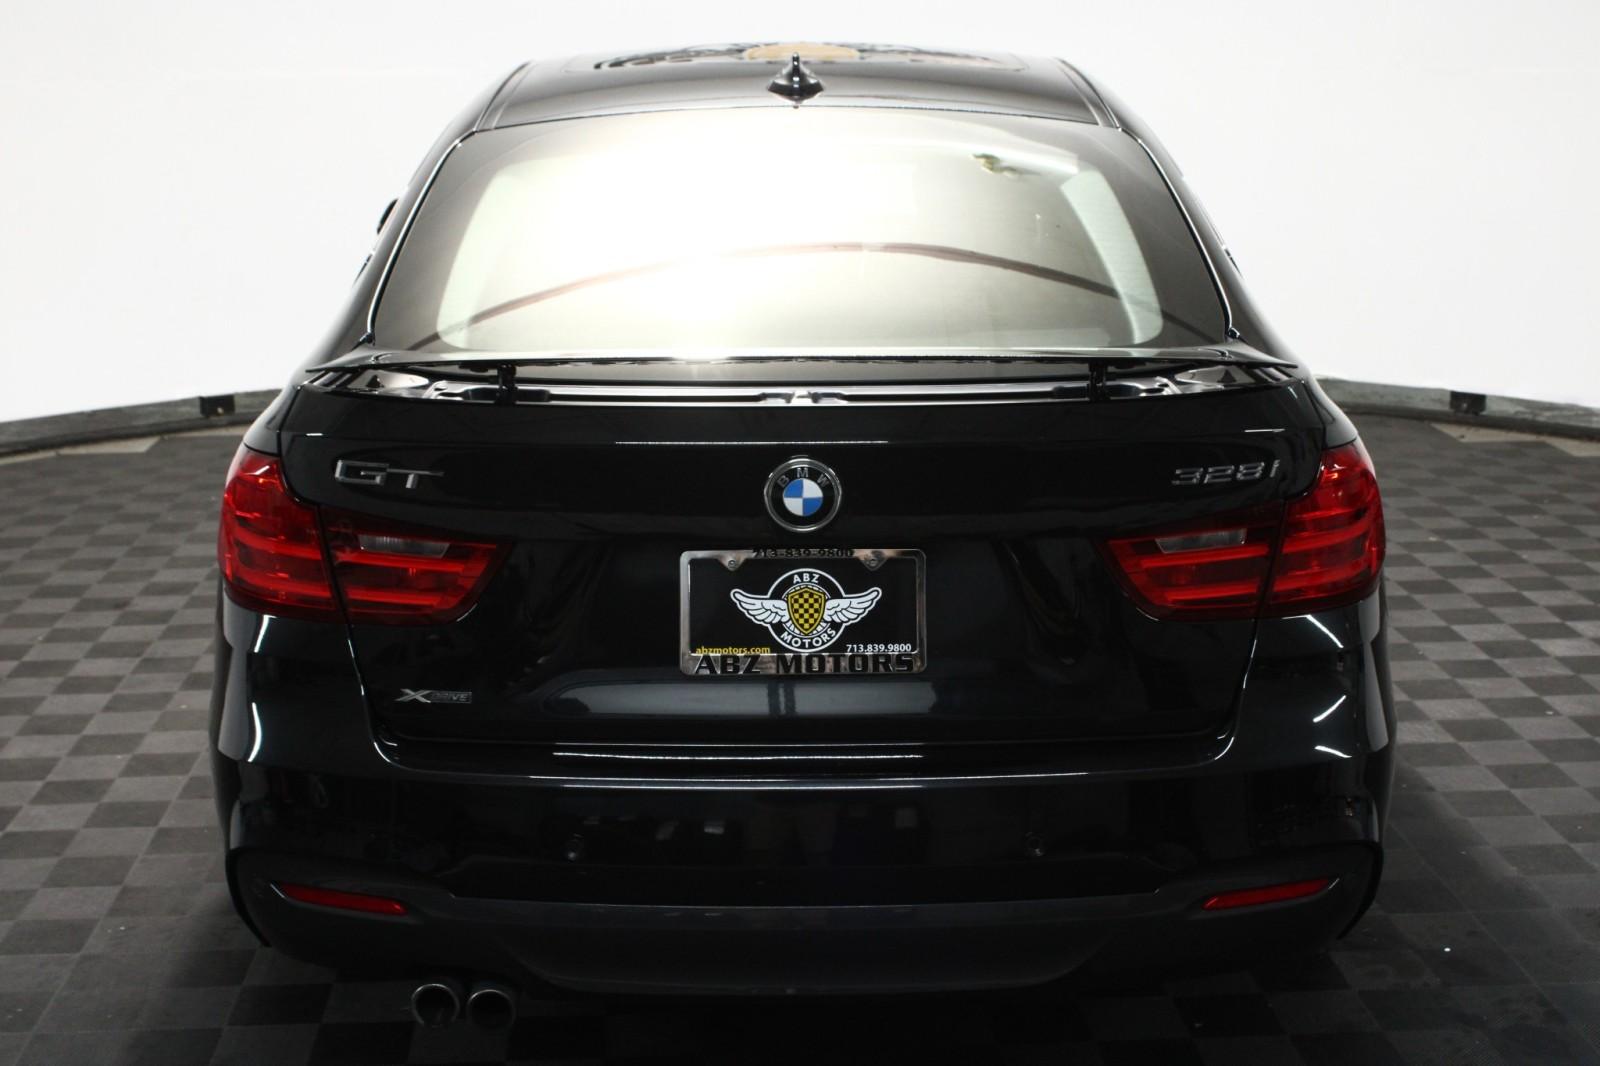 Pre-Owned 2015 BMW 3 Series Gran Turismo 328i xDrive 4dr Car in Manchester  #FD672359